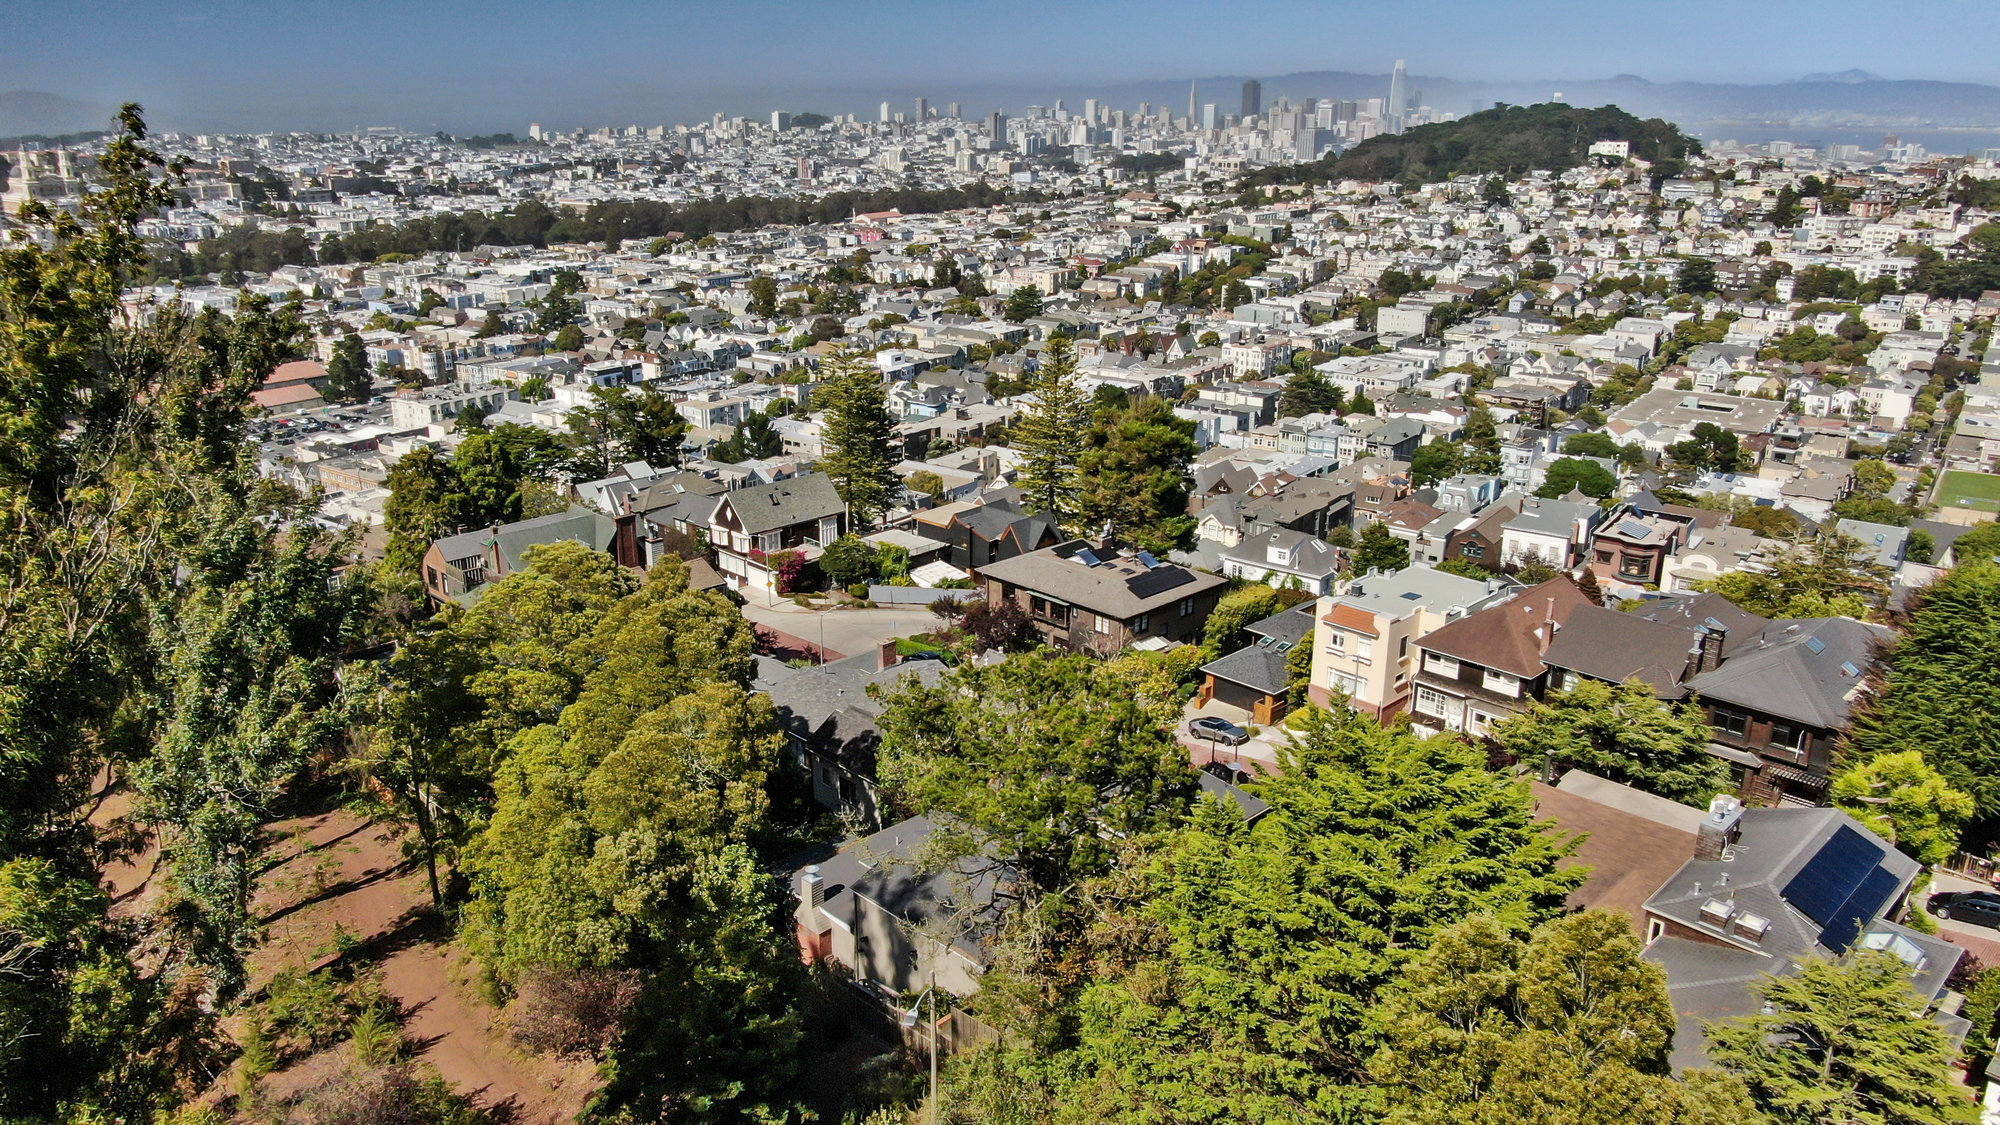 Property Photo: Aerial view from 183 Edgewood Avenue, showing Cole Valley and proximity to Golden Gate Park